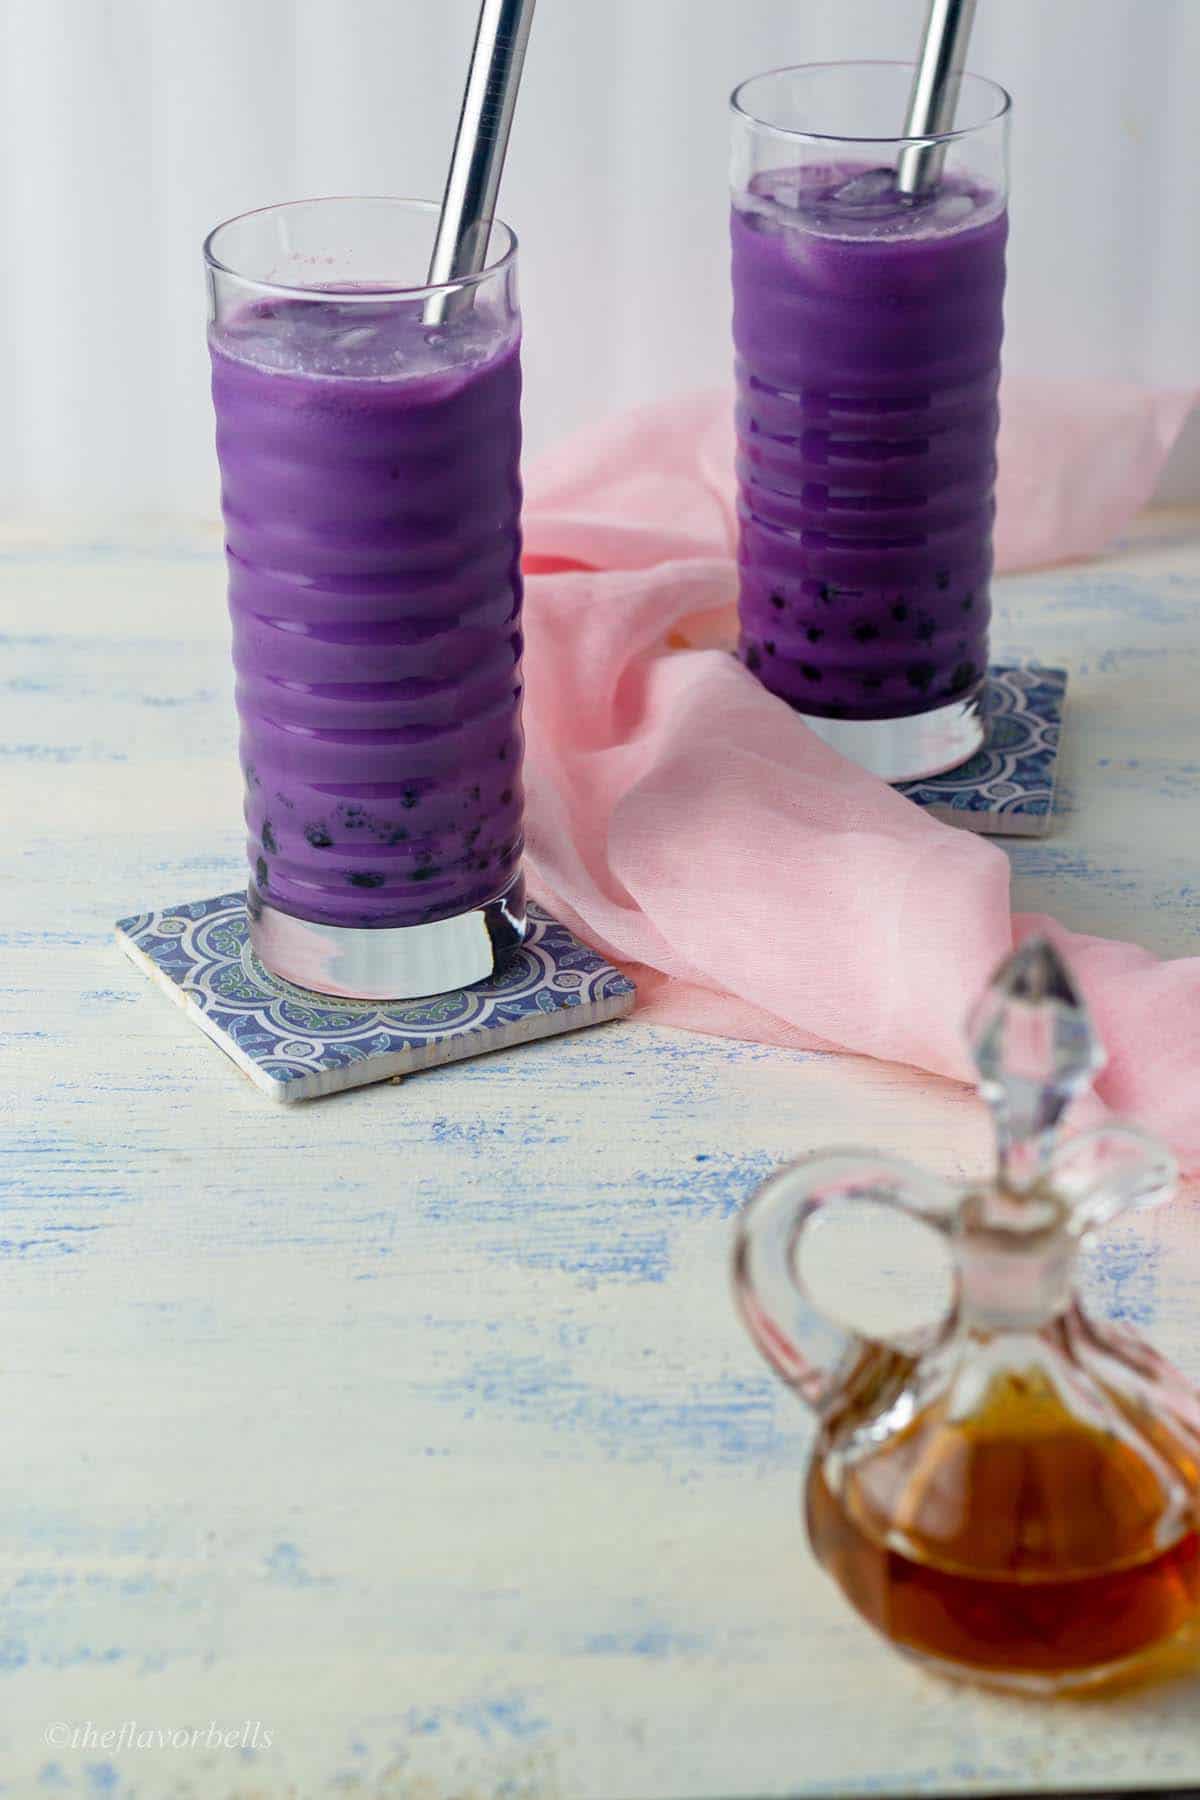 Two glasses of ube milk tea with a brown sugar syrup in the foreground